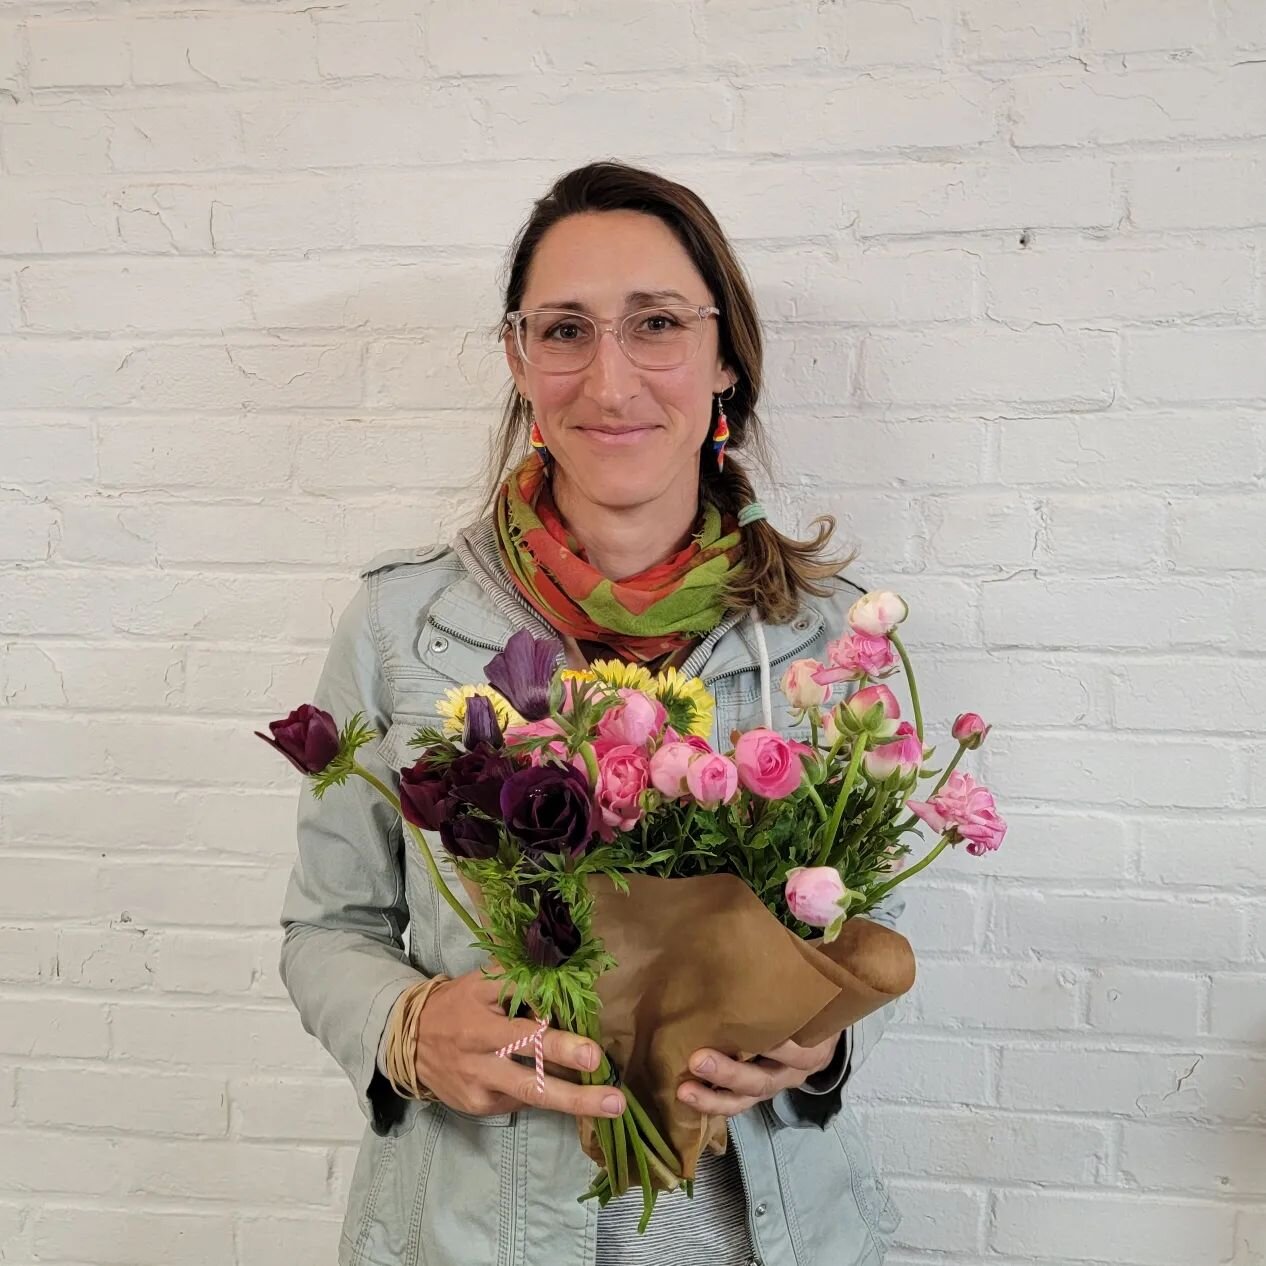 Have you met Julia of @pua.lea.floral yet? She's leading a woven floral crown lei workshop at the Collective NEXT WEEK! Her events have been so popular and will highlight the best of local flowers, so be sure to snag your spot soon! Ordering closes n